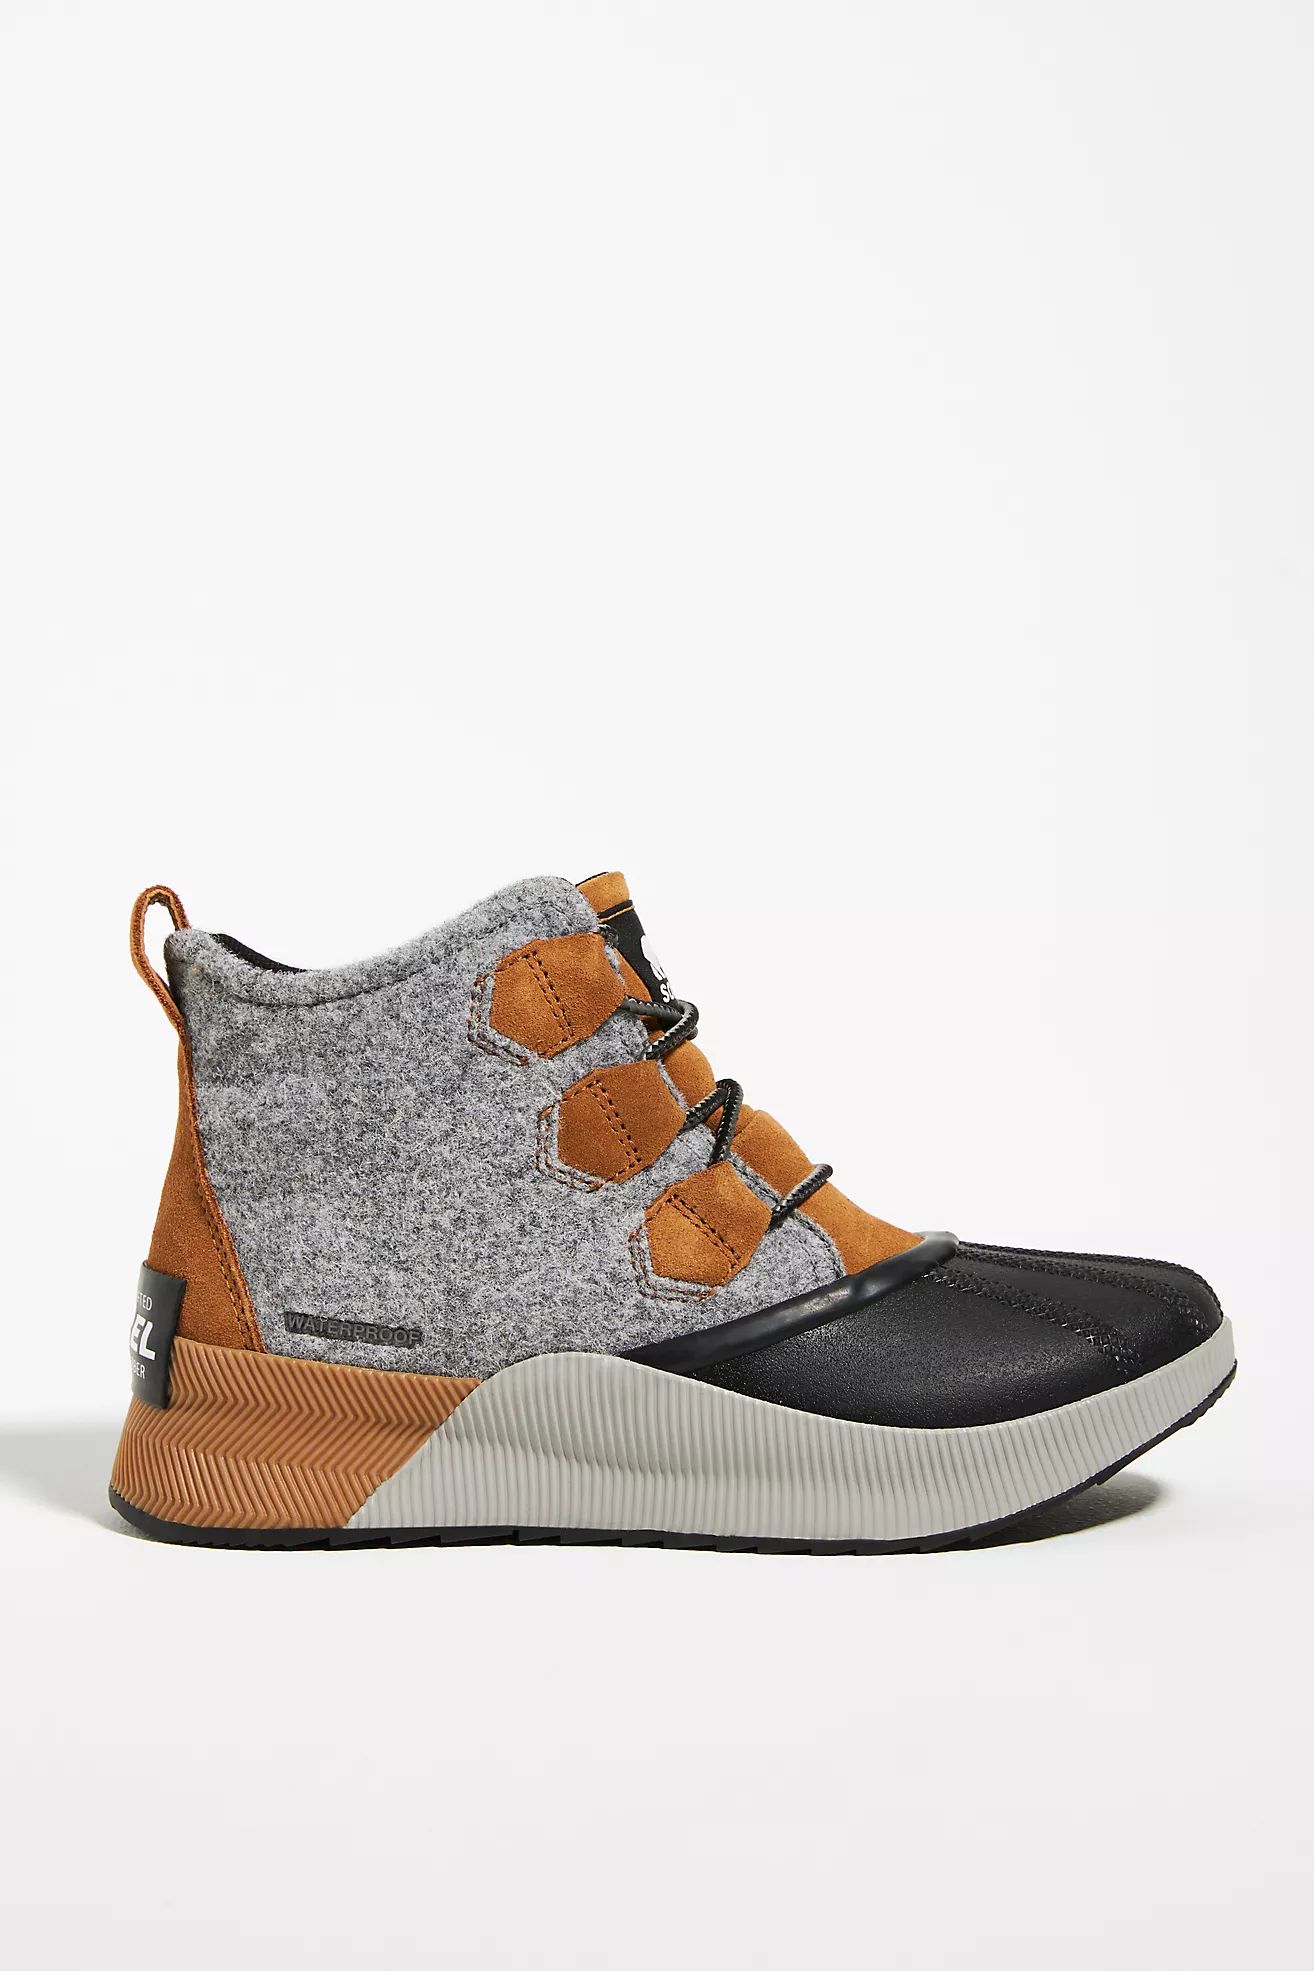 Sorel Out N About III Classic Boots | Anthropologie (US)